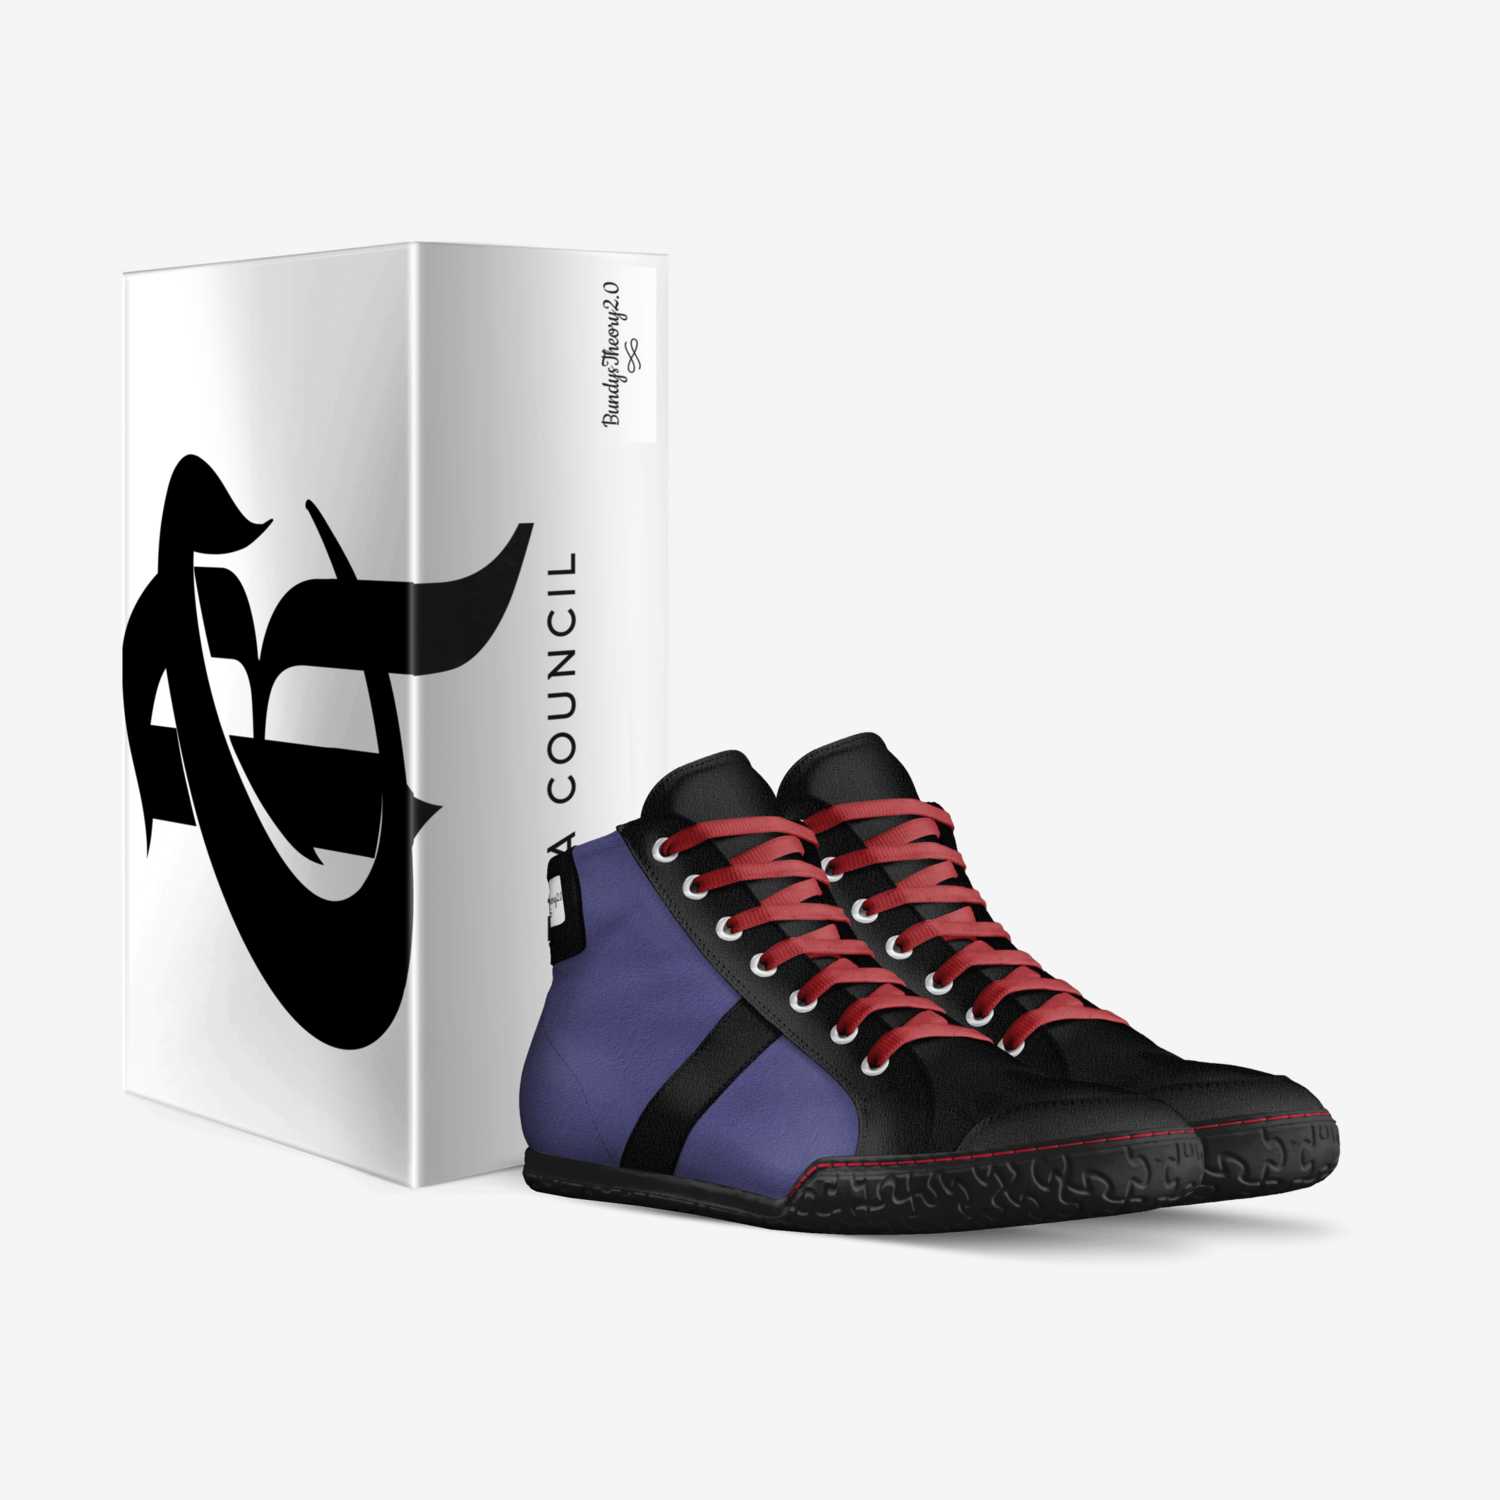 BundysTheory2.0 custom made in Italy shoes by Jeremey Mcadoo | Box view